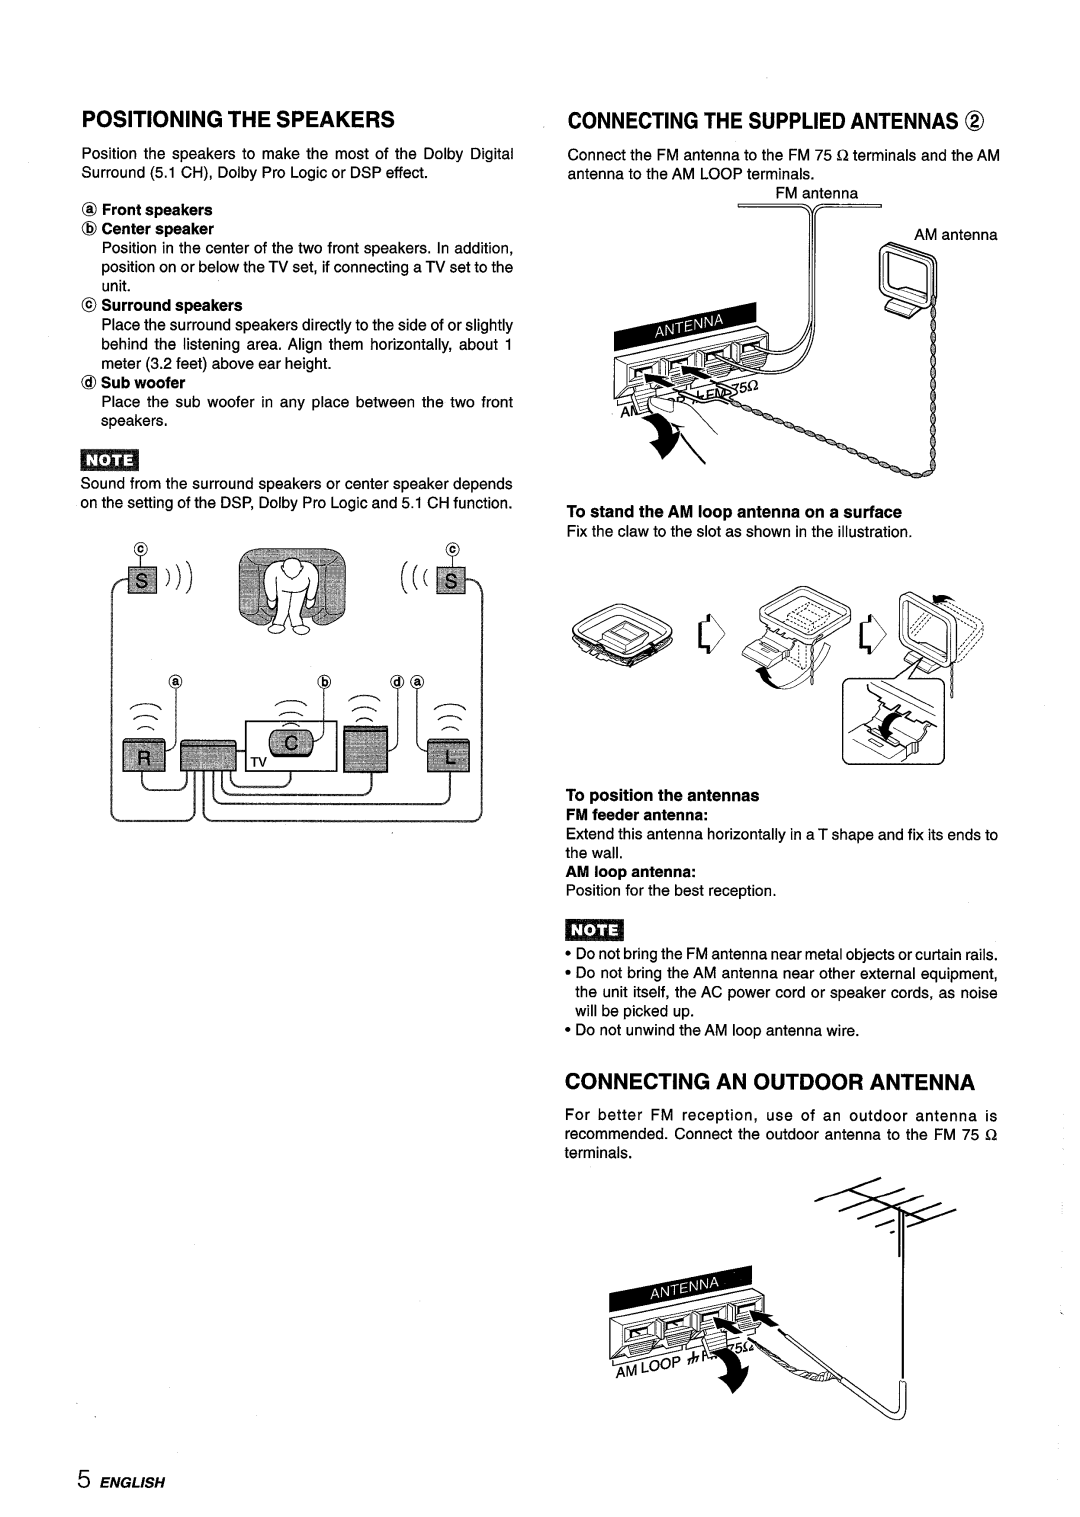 Aiwa AV-D55 Positioning The Speakers, Connecting The Supplied Antennas @, Connecting An Outdoor Antenna, @ Sub woofer 